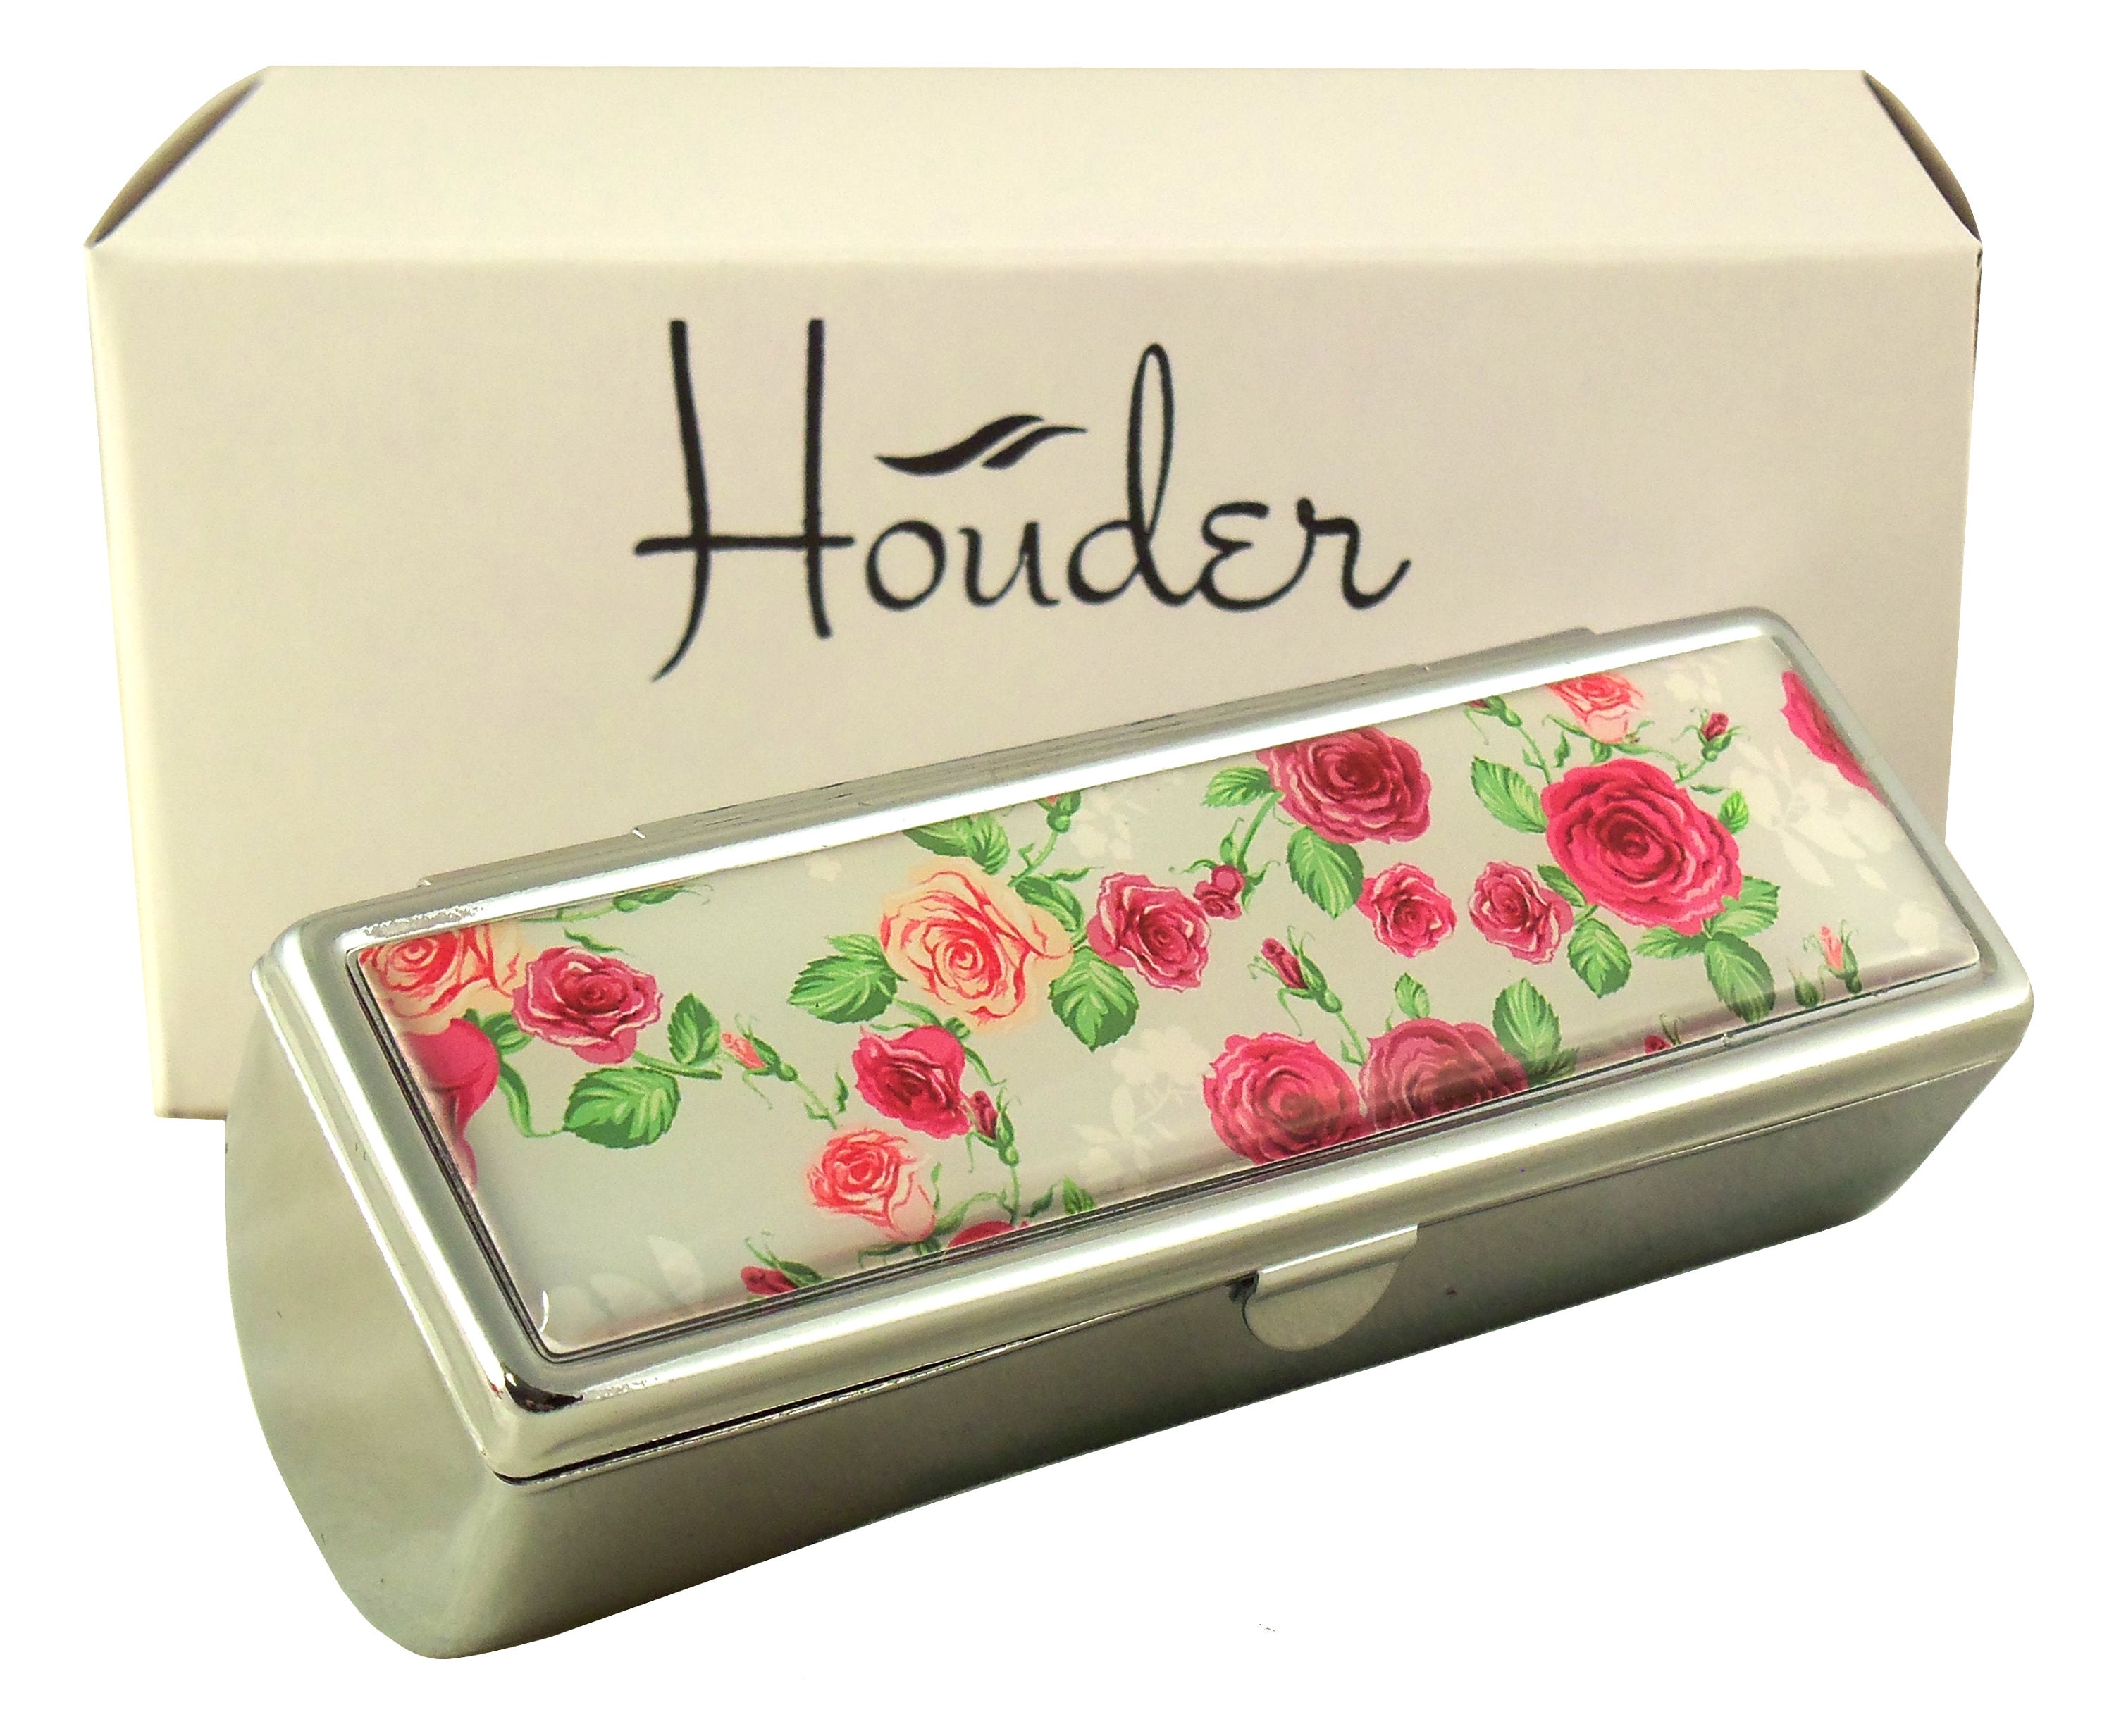 Houder Designer Pill Box - Decorative Pill Case with Gift Box - Carry Your Meds in Style (Peacock Feather)